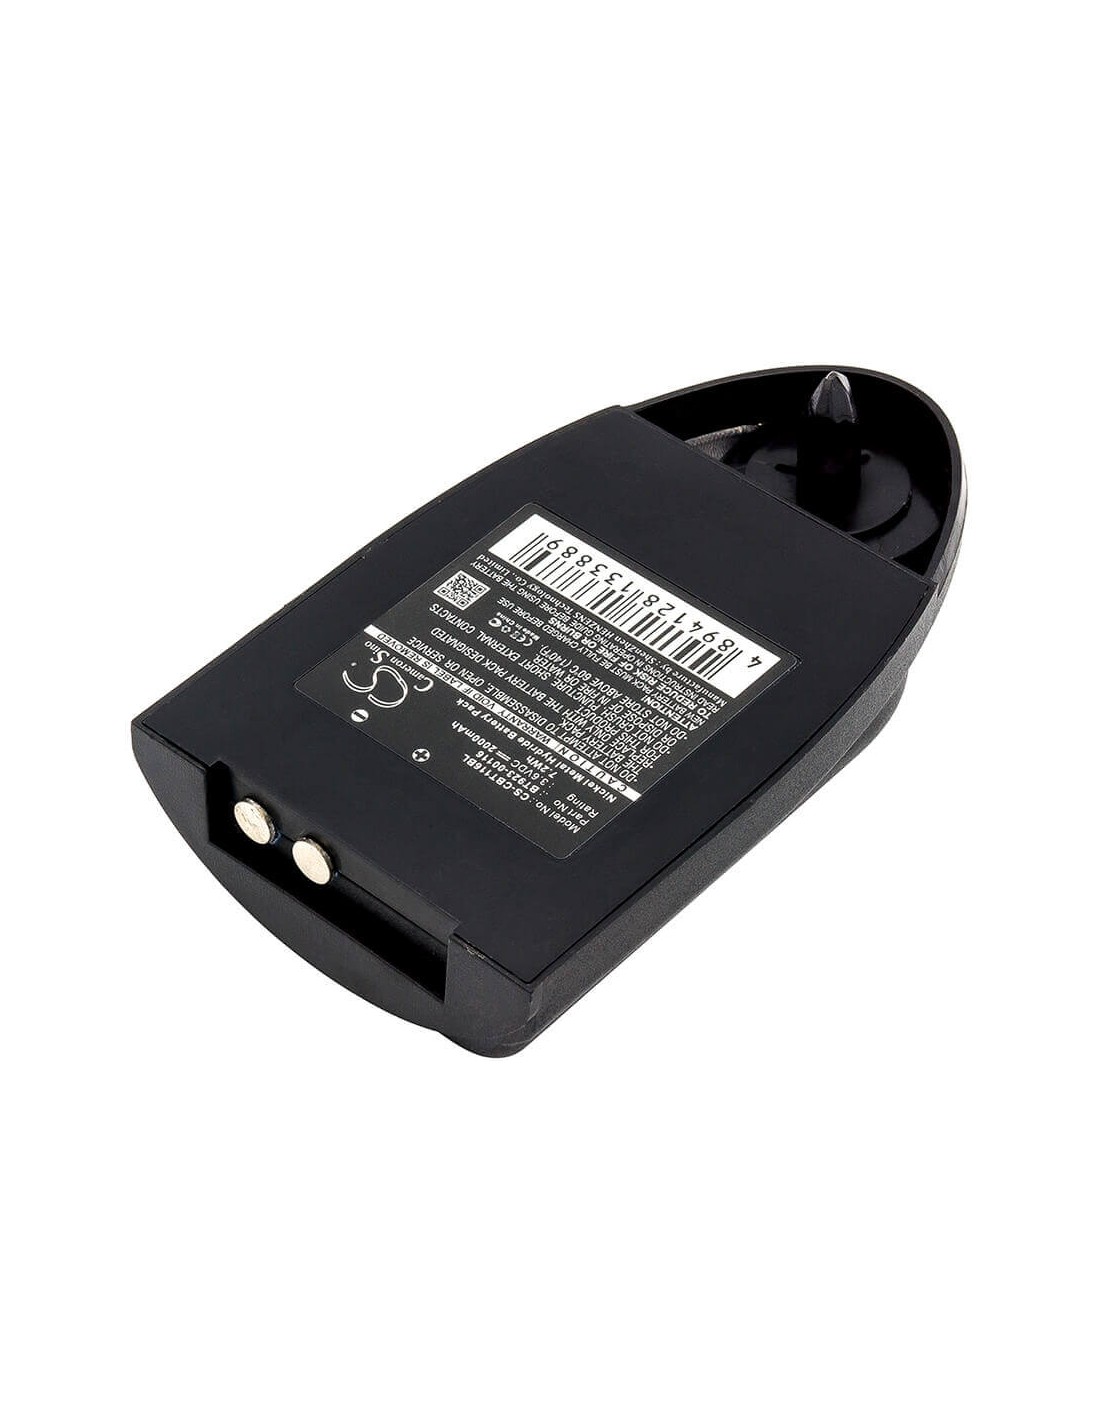 Battery for Cattron Theimeg, Excalibur Remote 3.6V, 2000mAh - 7.20Wh